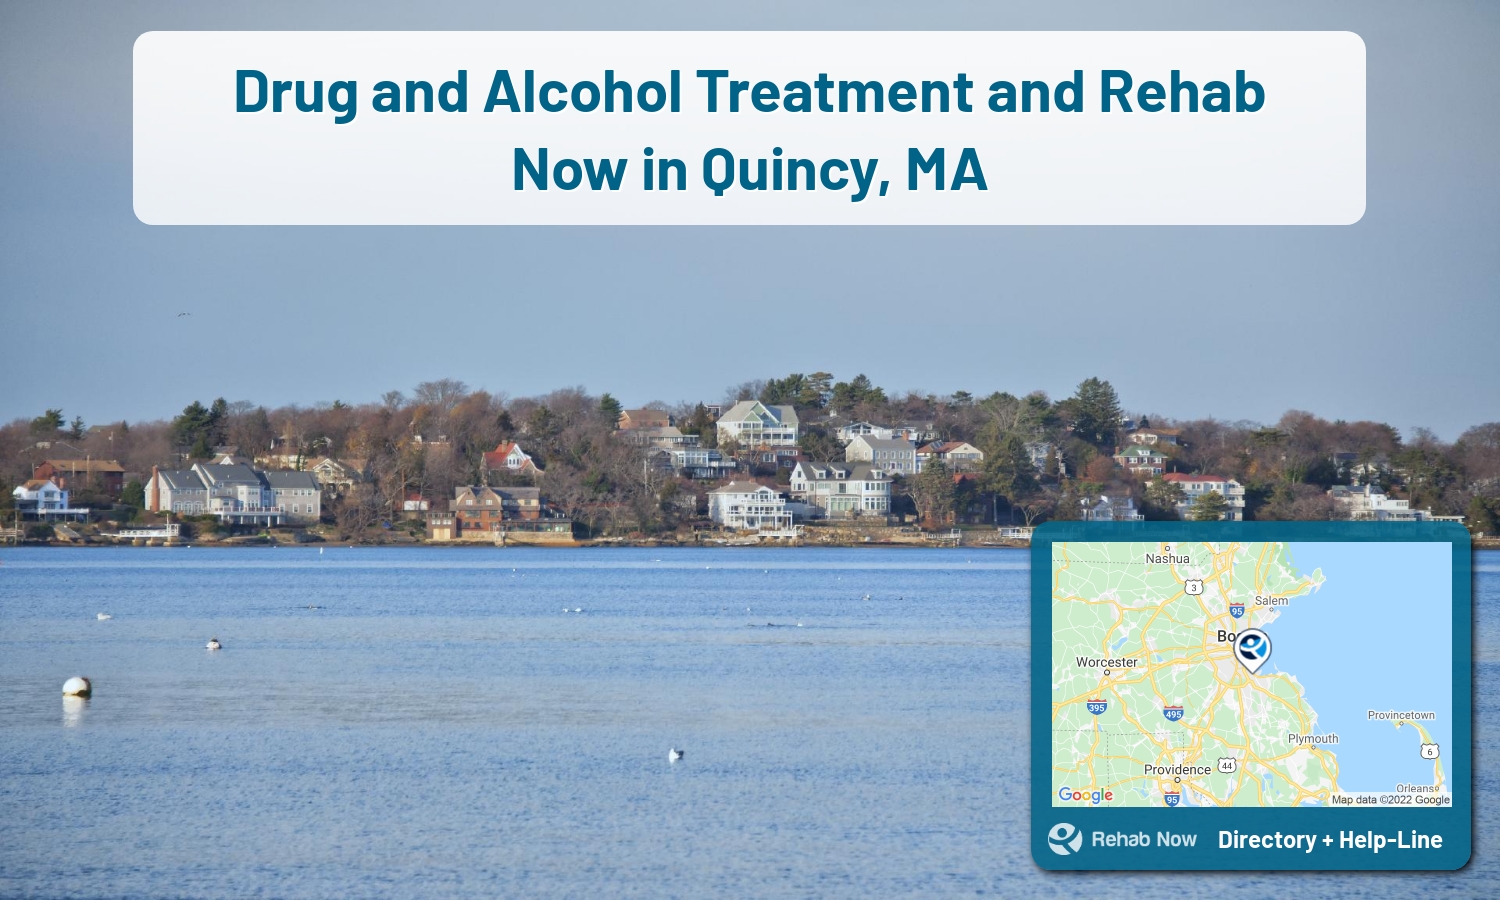 Our experts can help you find treatment now in Quincy, Massachusetts. We list drug rehab and alcohol centers in Massachusetts.